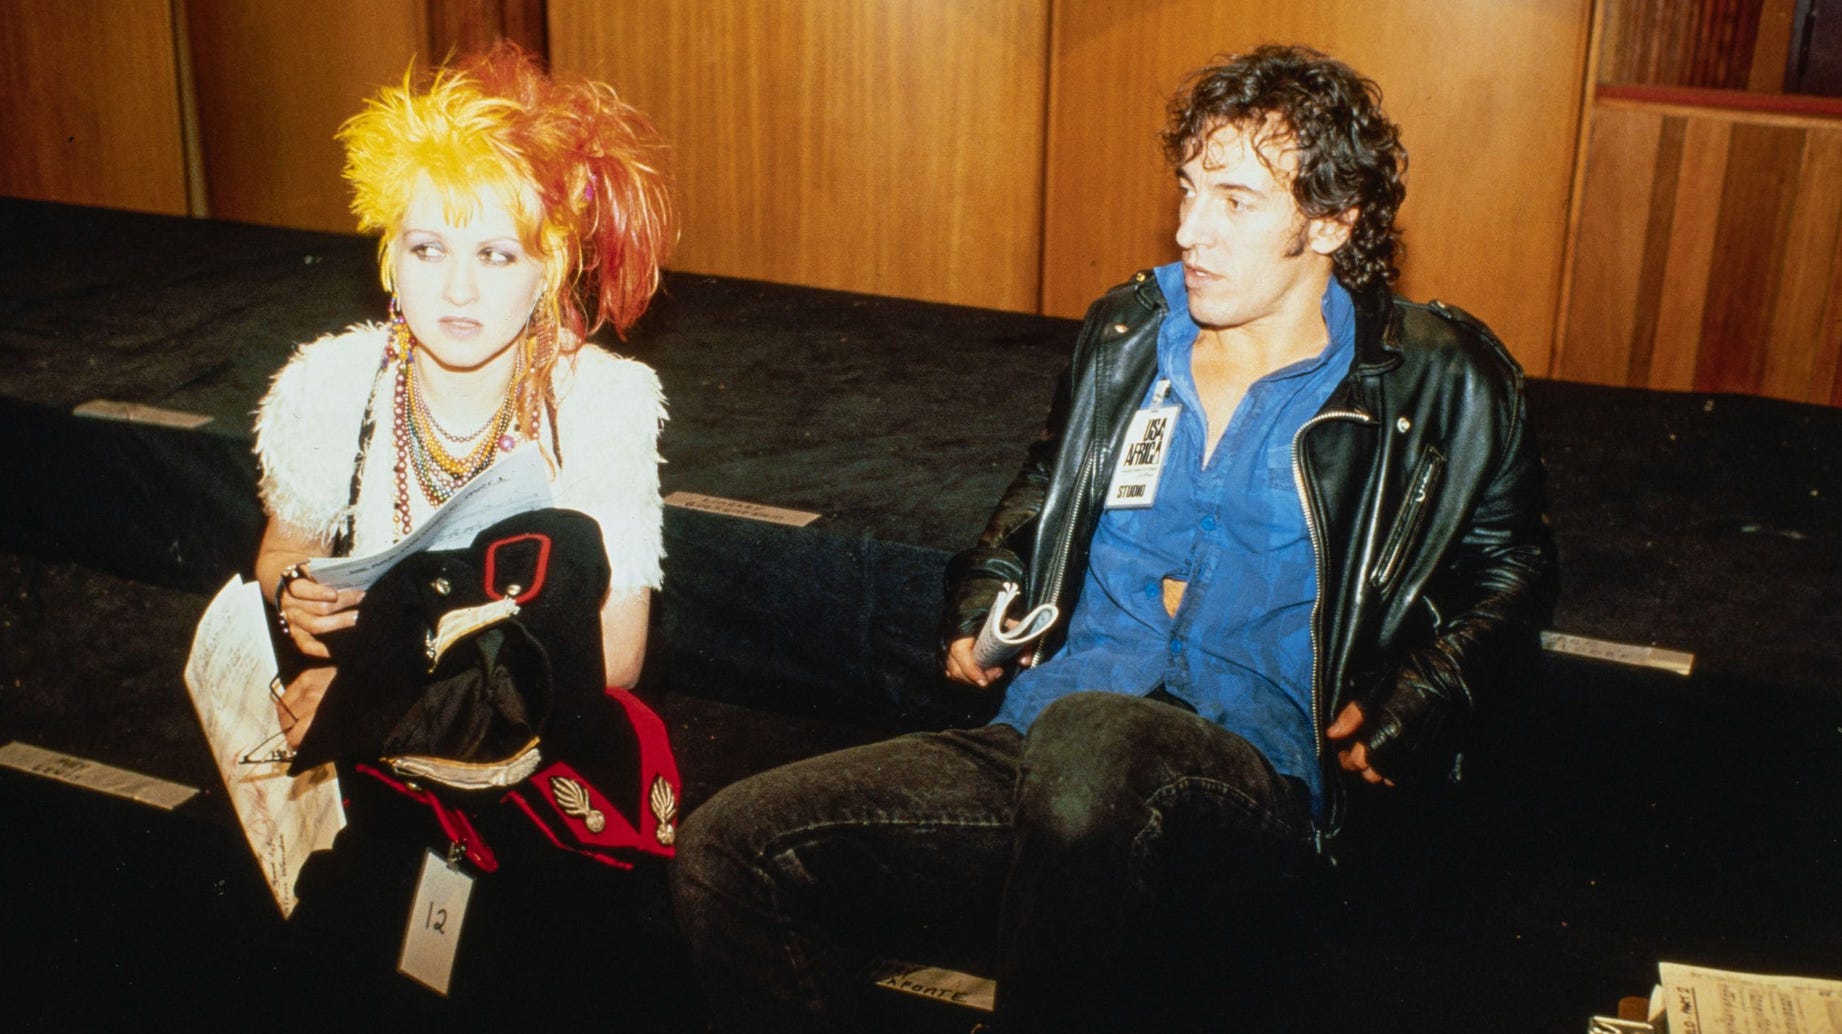 Cyndi Lauper and Bruce Springsteen sitting down looking skeptical